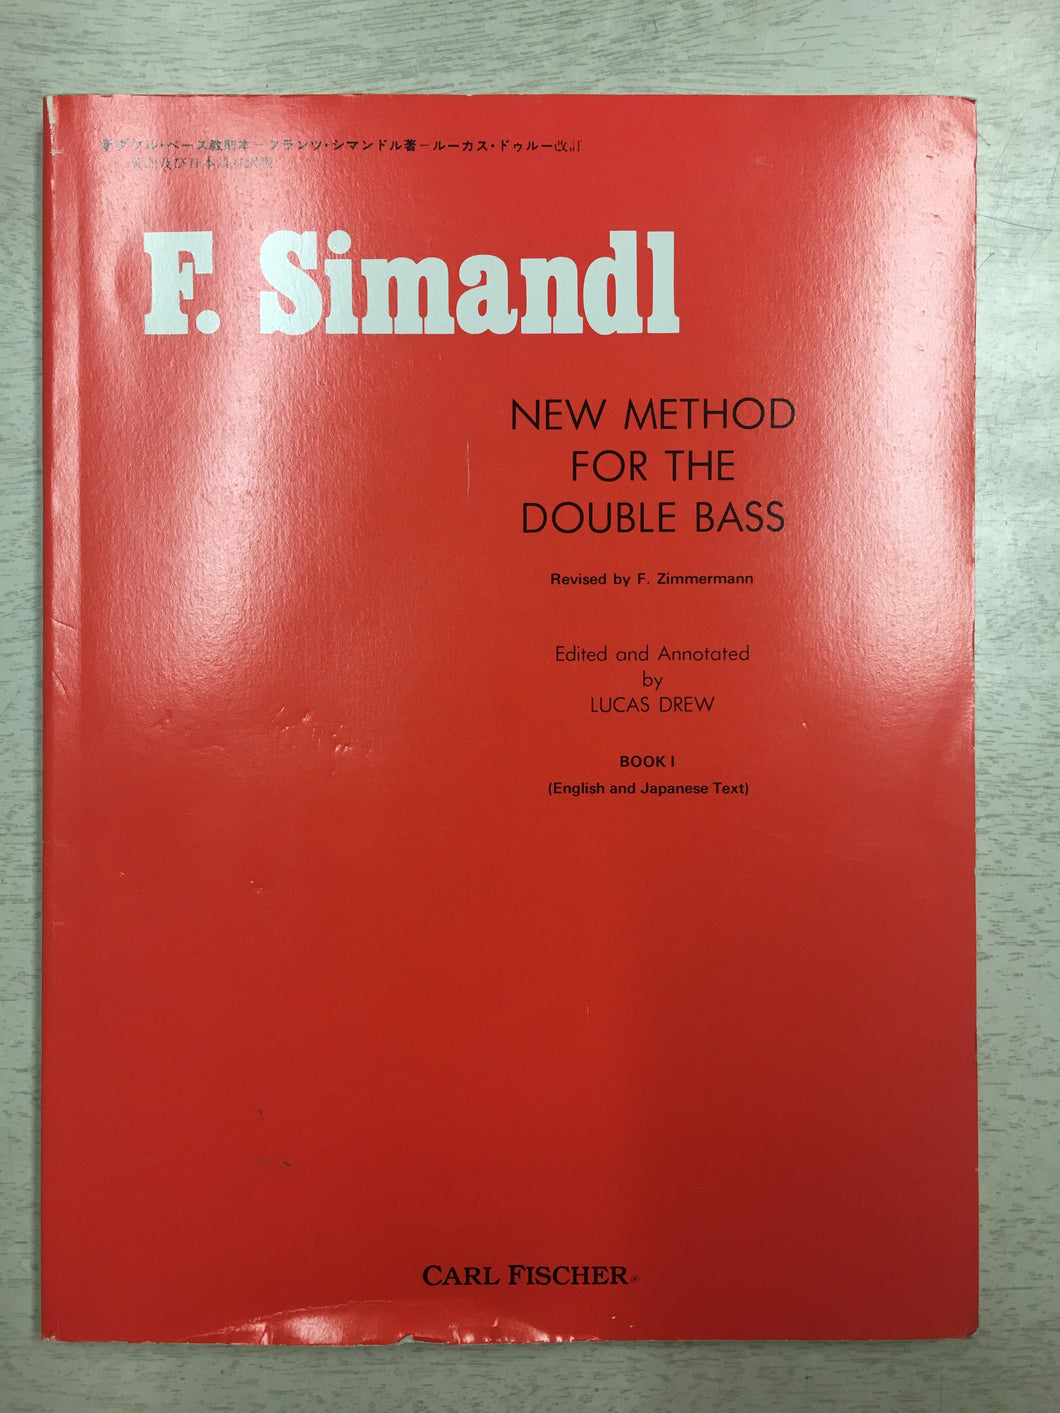 New Method for the Double bass, Lucas Drew Simandl